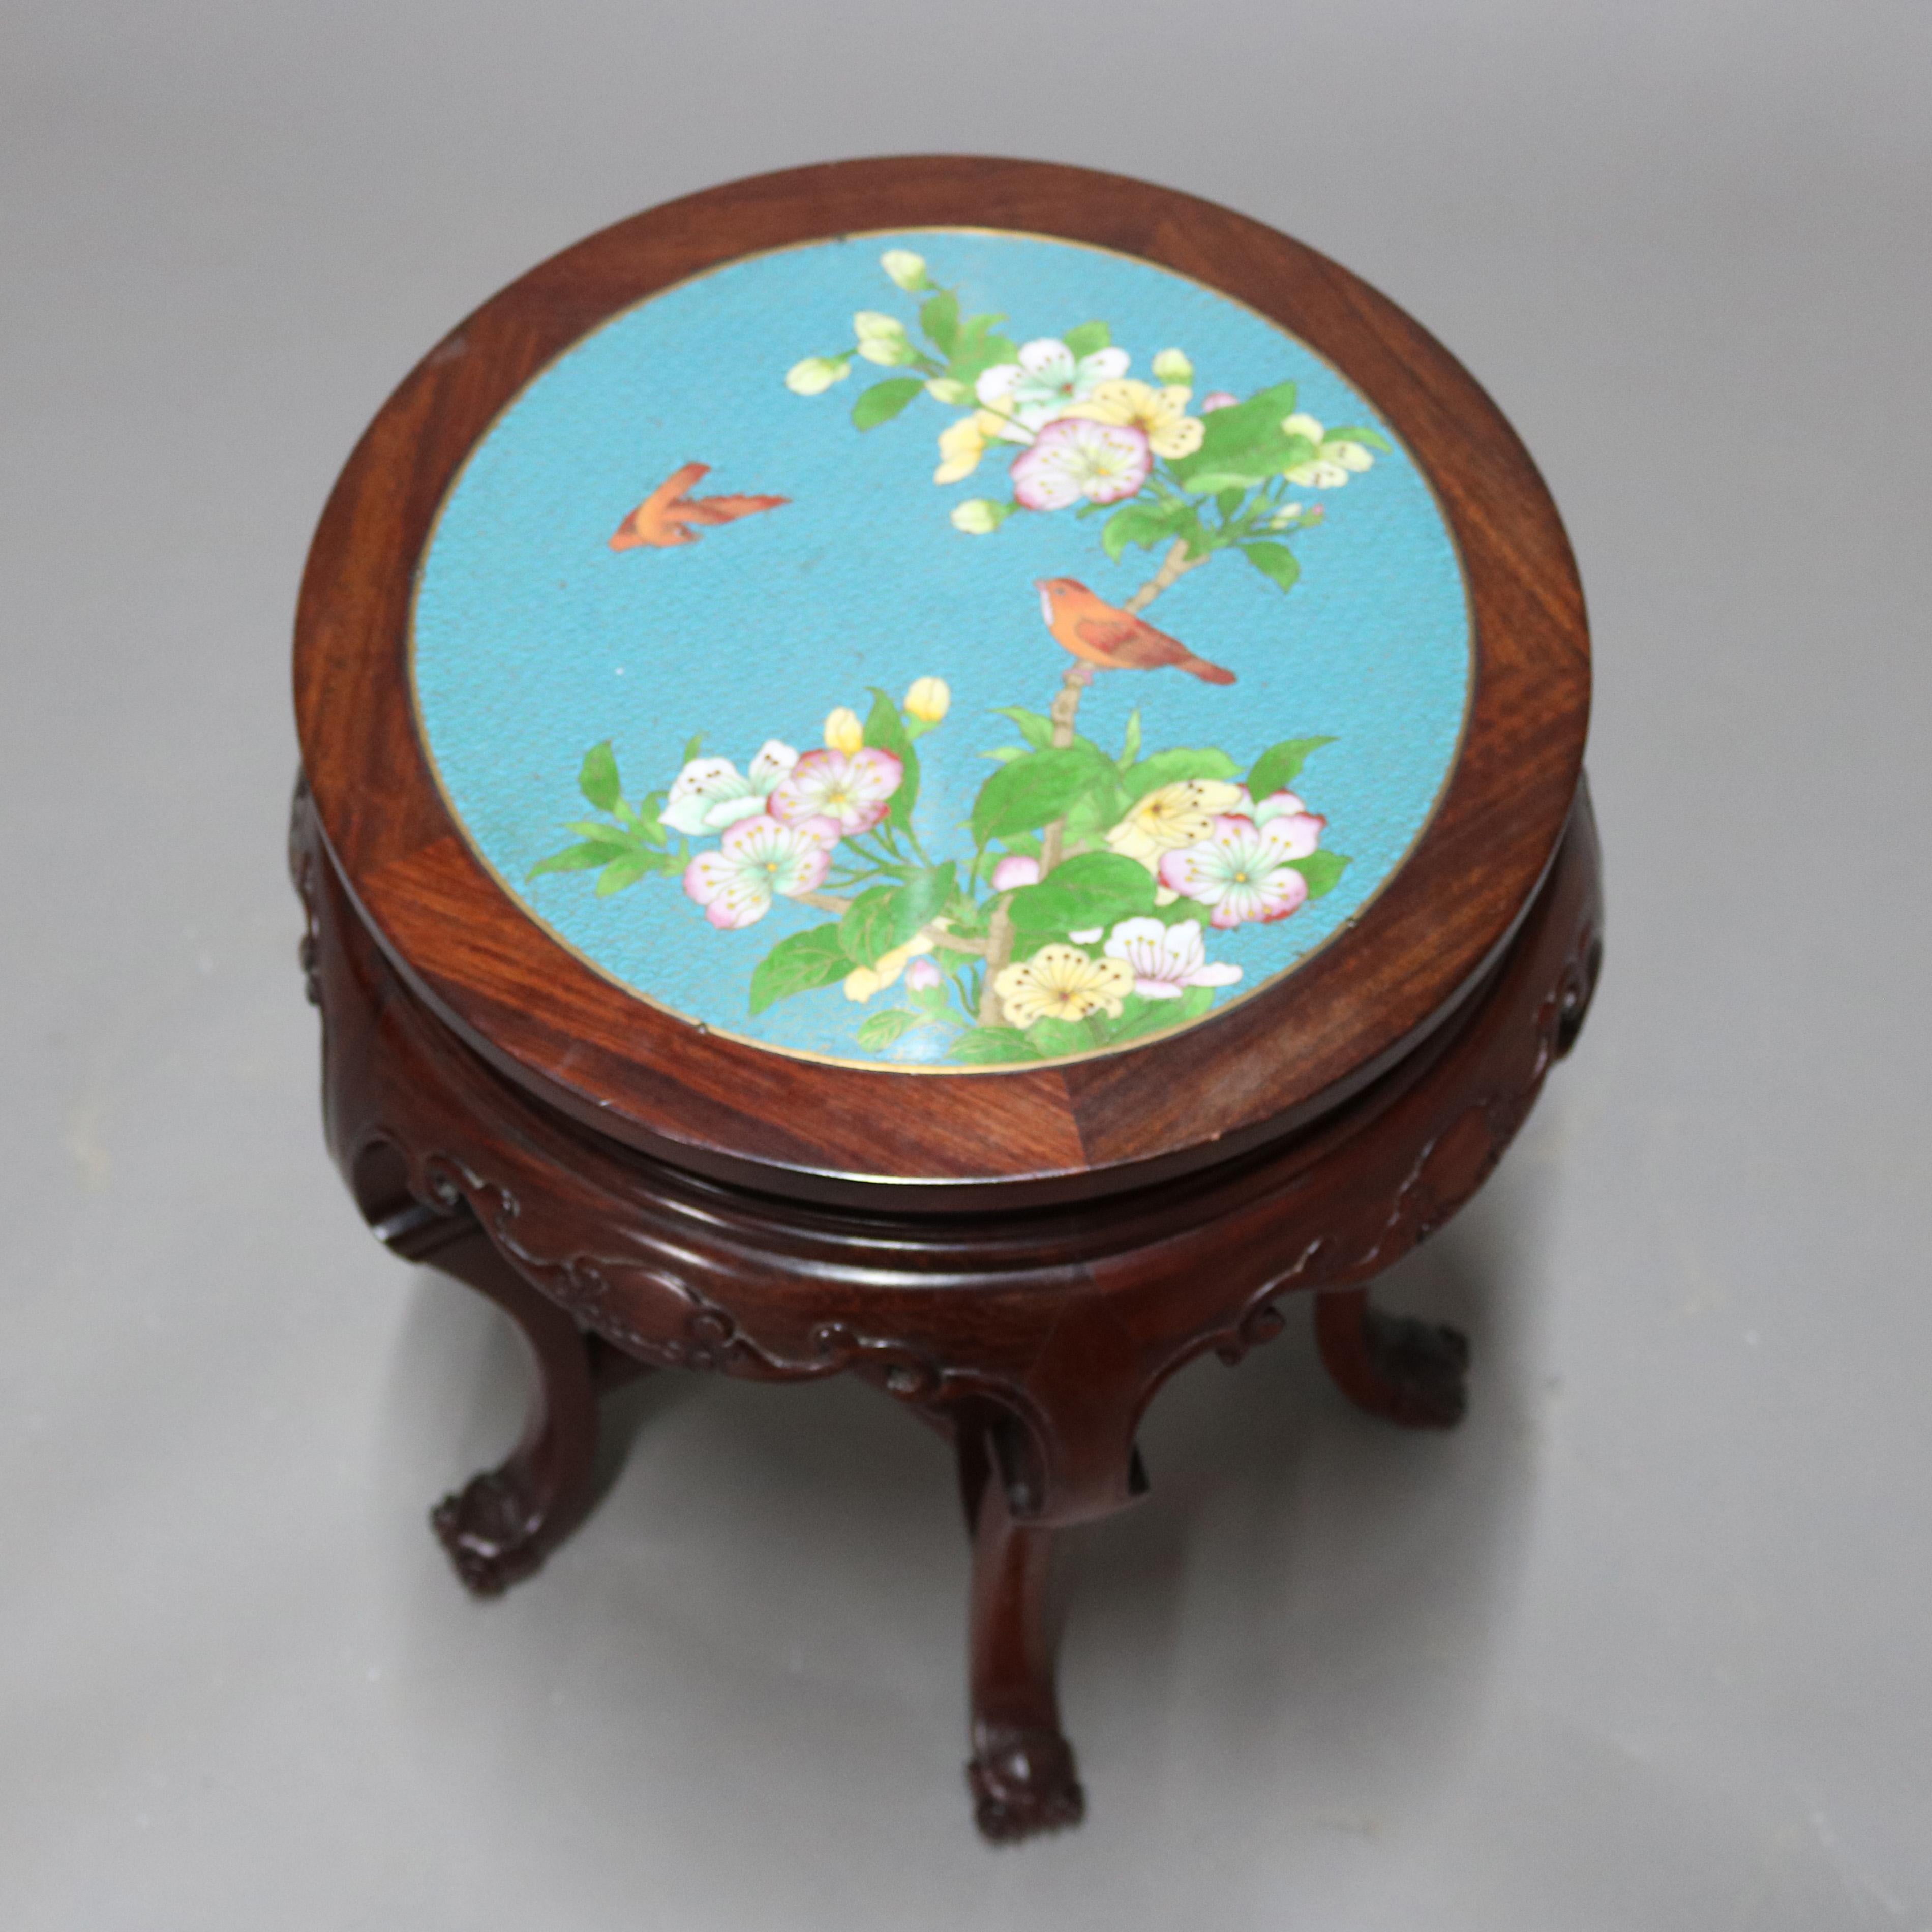 A vintage Chinese low table offers Cloisonné inset top having garden scene motif seated in carved mahogany base with shaped skirt raised on cabriole legs, 20th century

Measures: 20.25